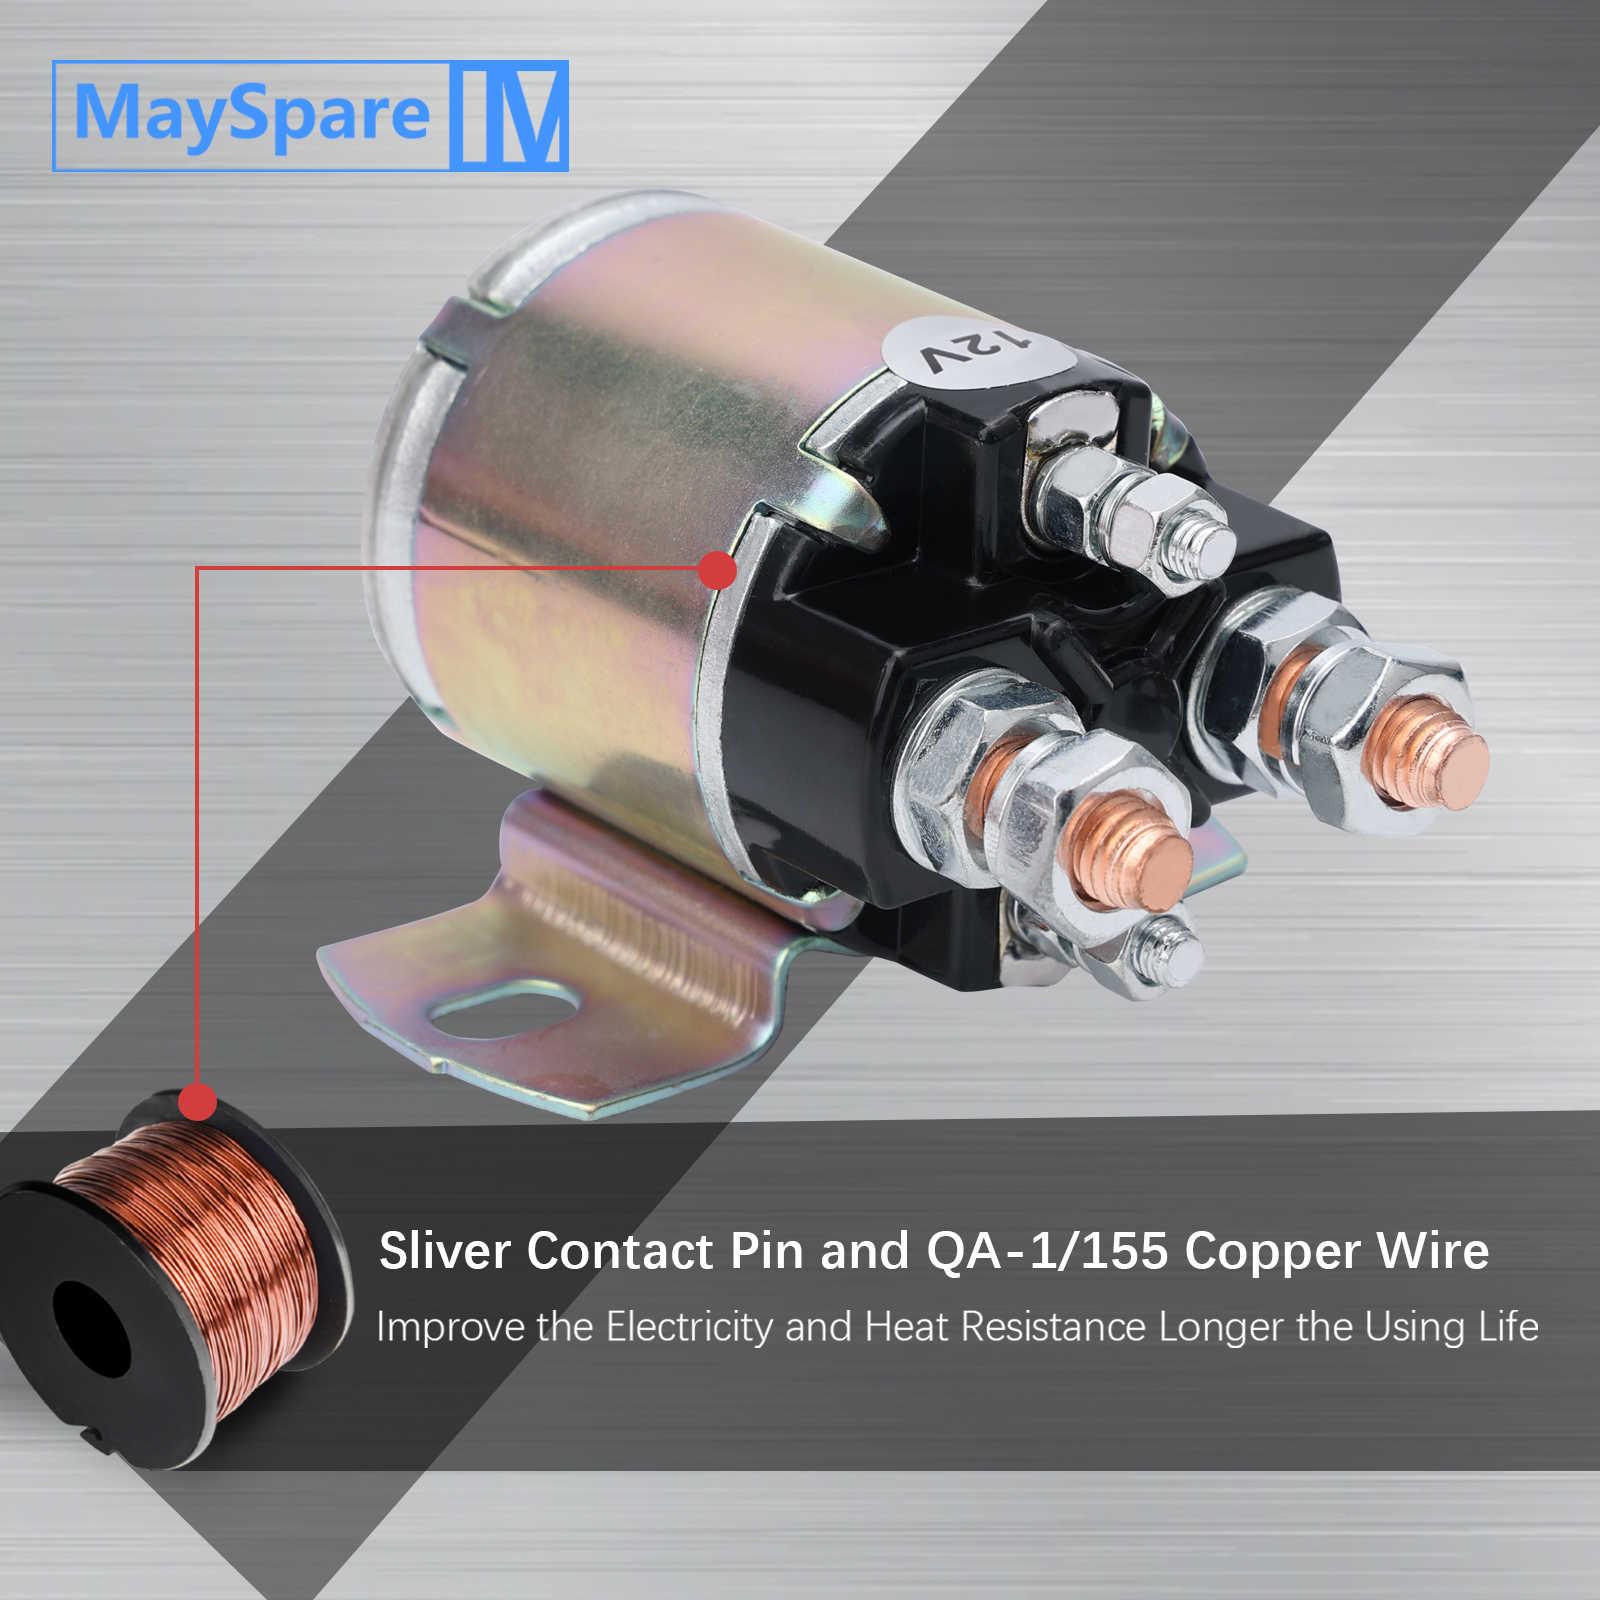 12V Yamaha starter Solenoid Made of High Quality Copper Wire